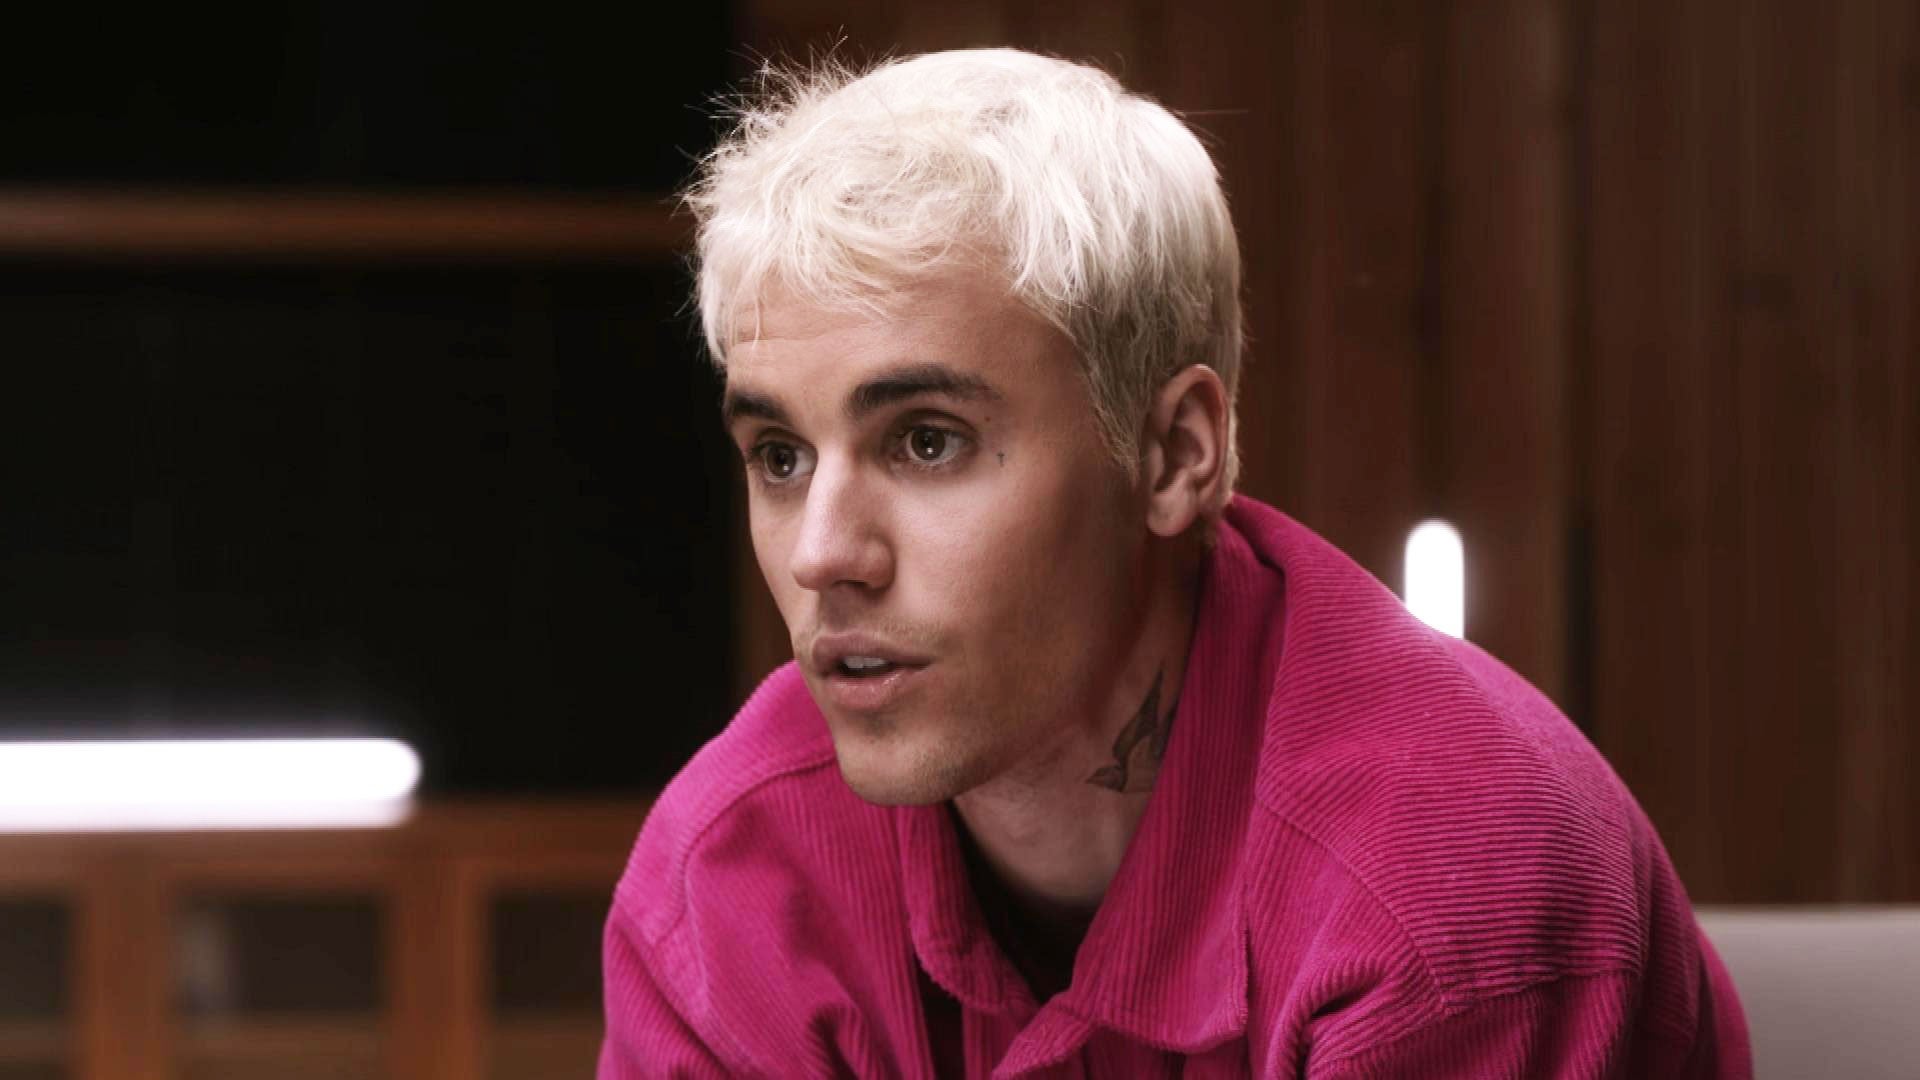 Justin Bieber Drops New Song Intentions Feat Quavo With A